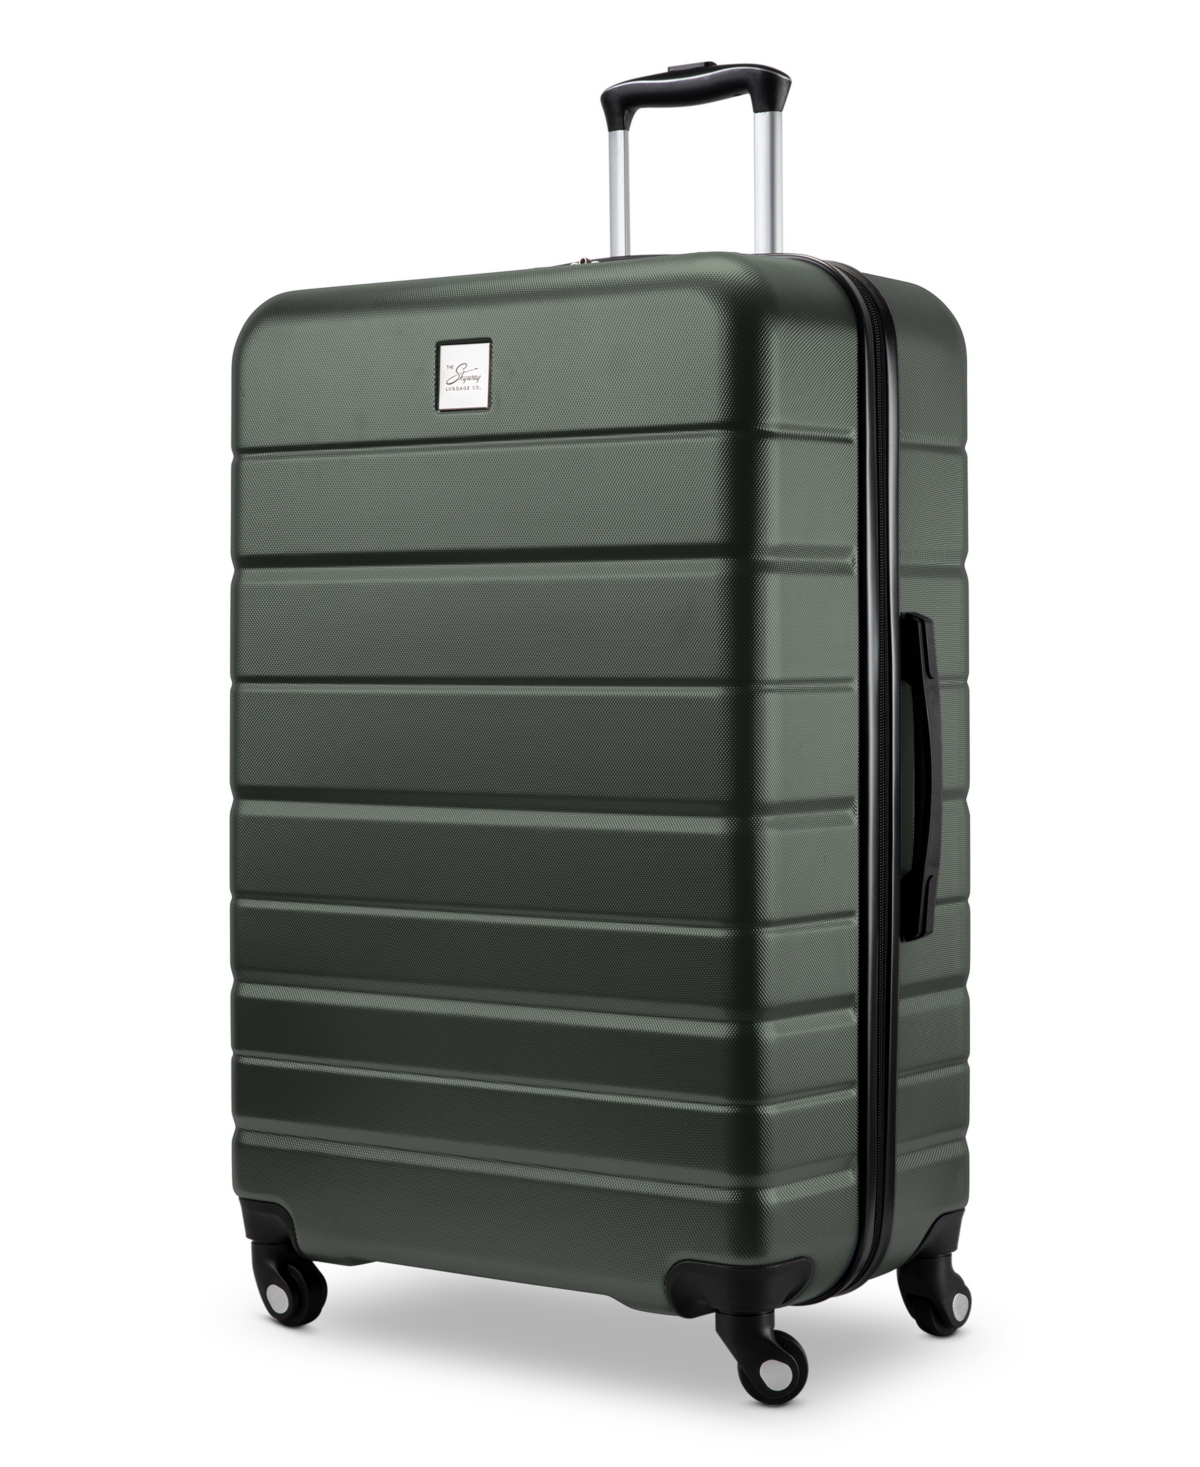 Epic 2.0 Hardside Large Check-in Spinner Suitcase, 28" - Silver-Tone Lilac